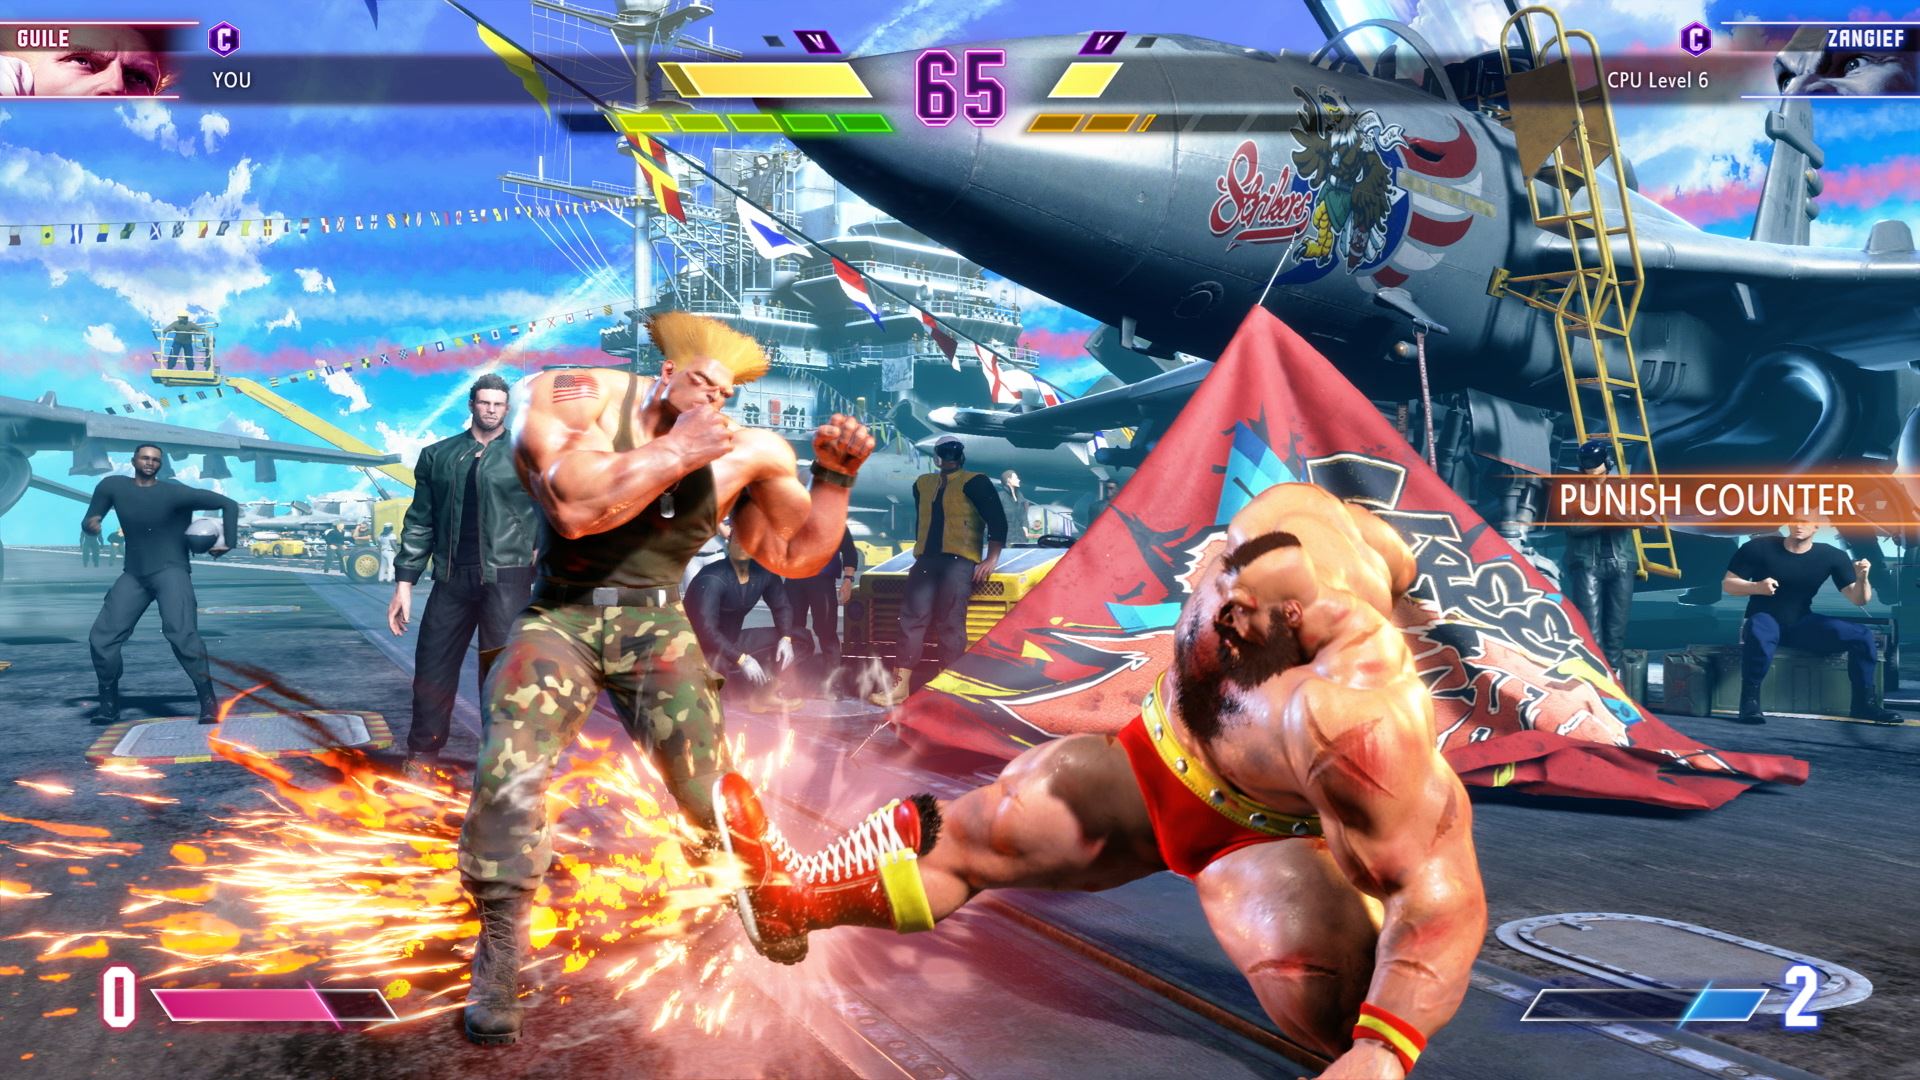 Is Street Fighter 6 Coming Out on Switch? Release Date News